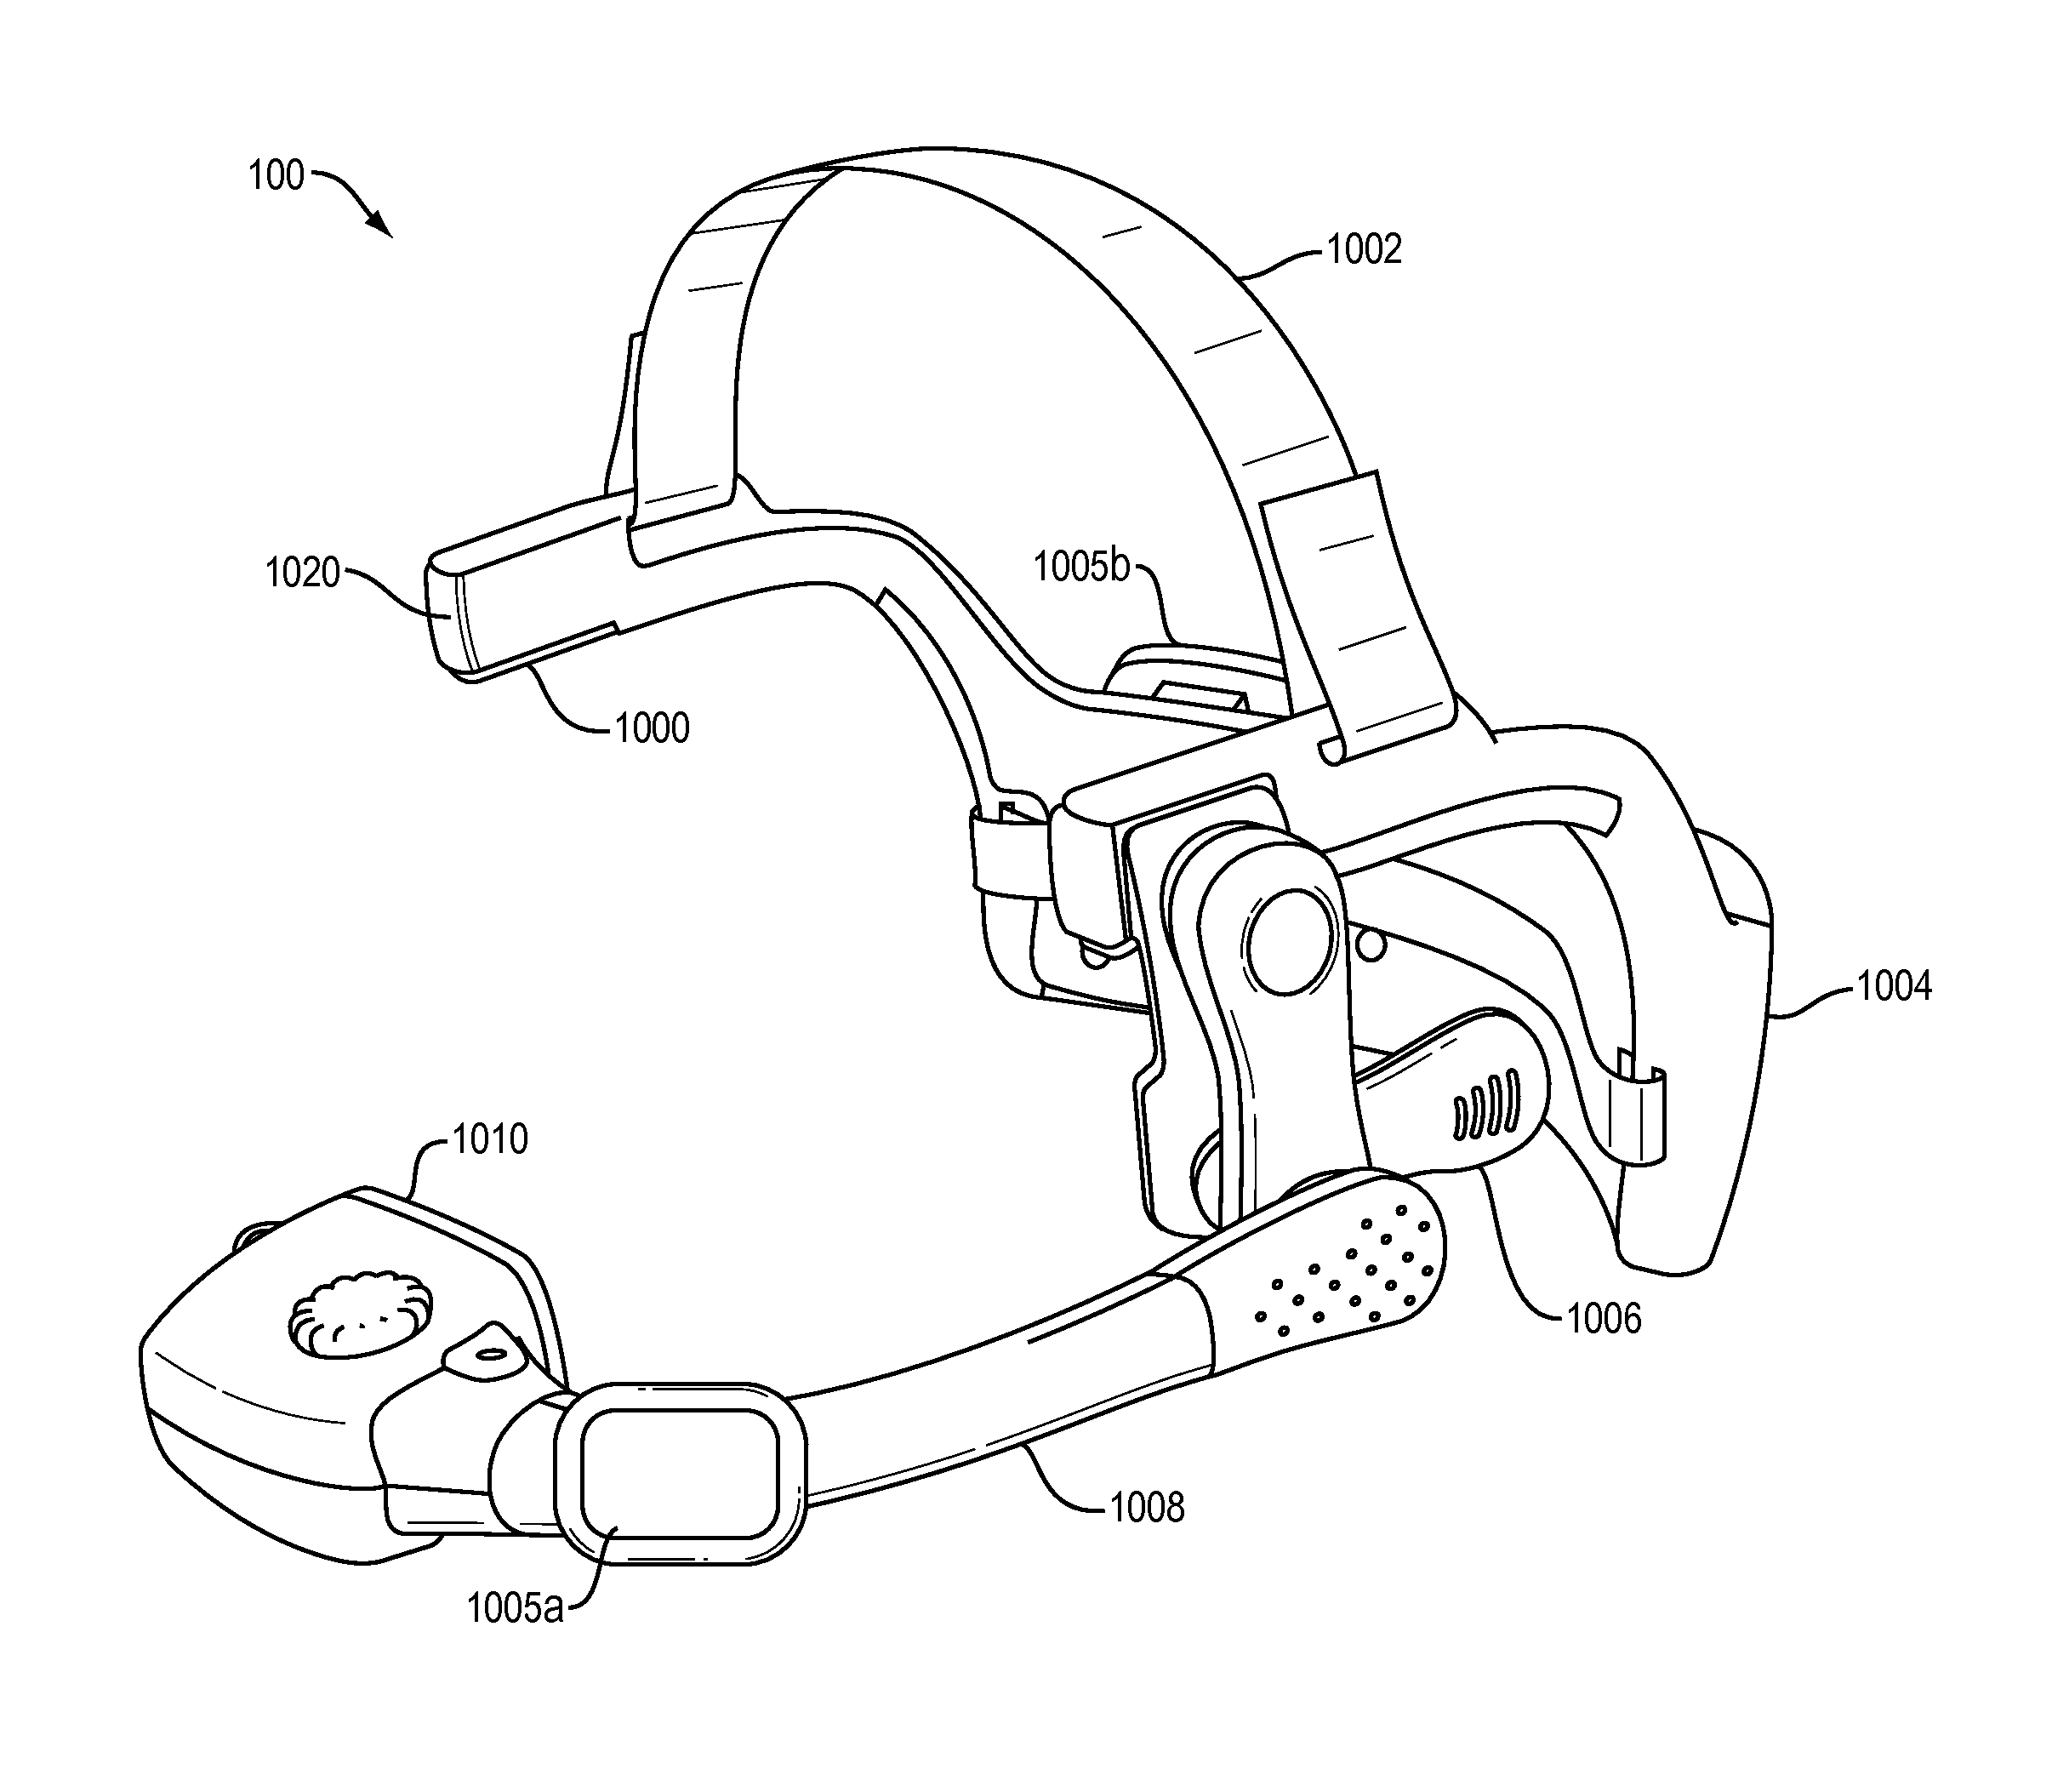 Spatially Diverse Antennas for a Headset Computer